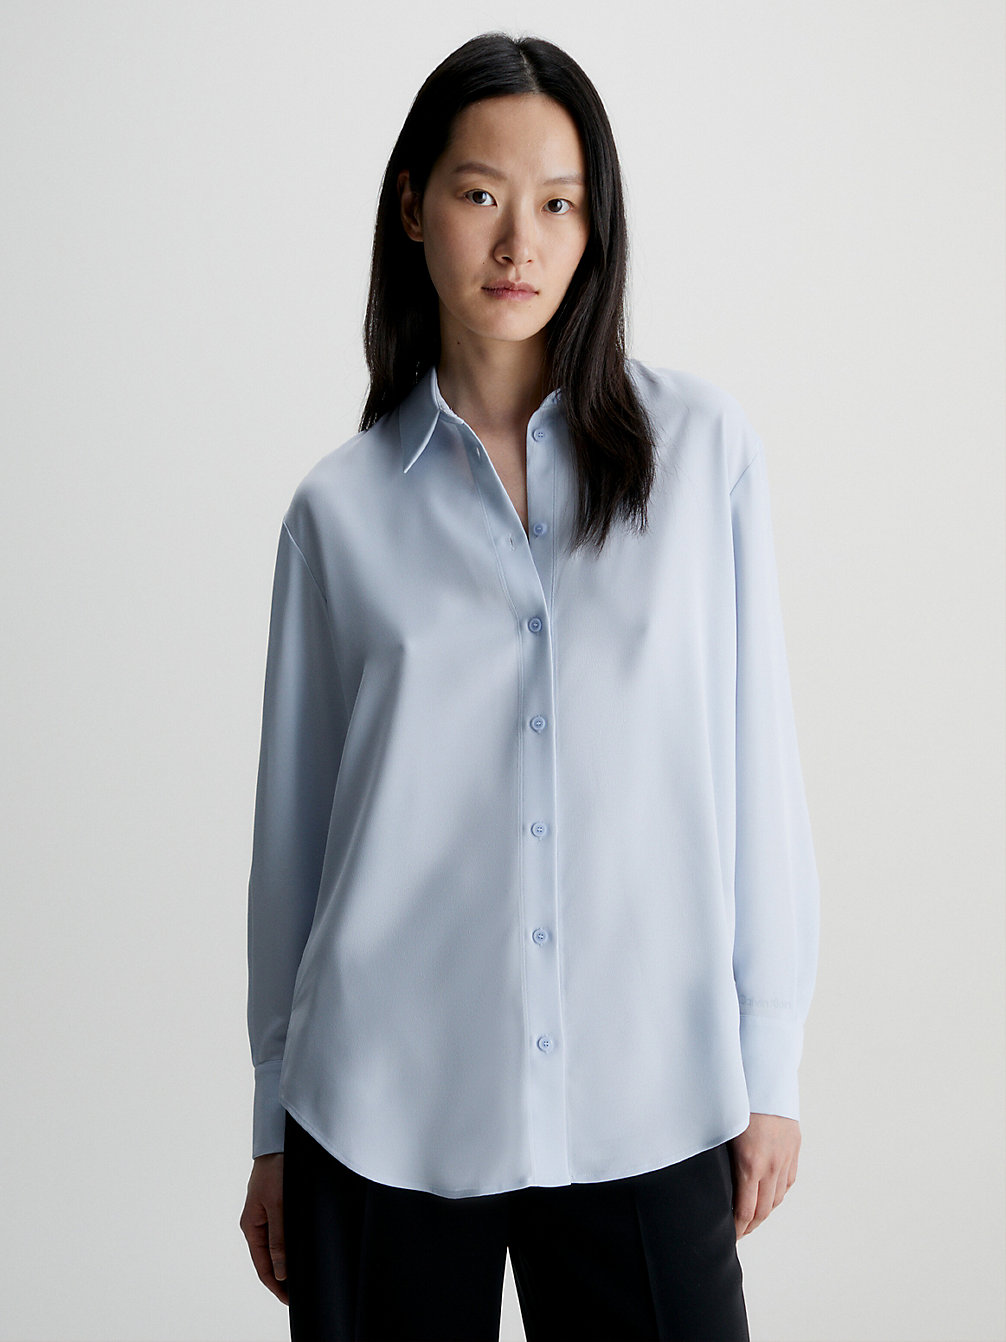 ARCTIC ICE Relaxed Lightweight Crepe Shirt undefined Women Calvin Klein